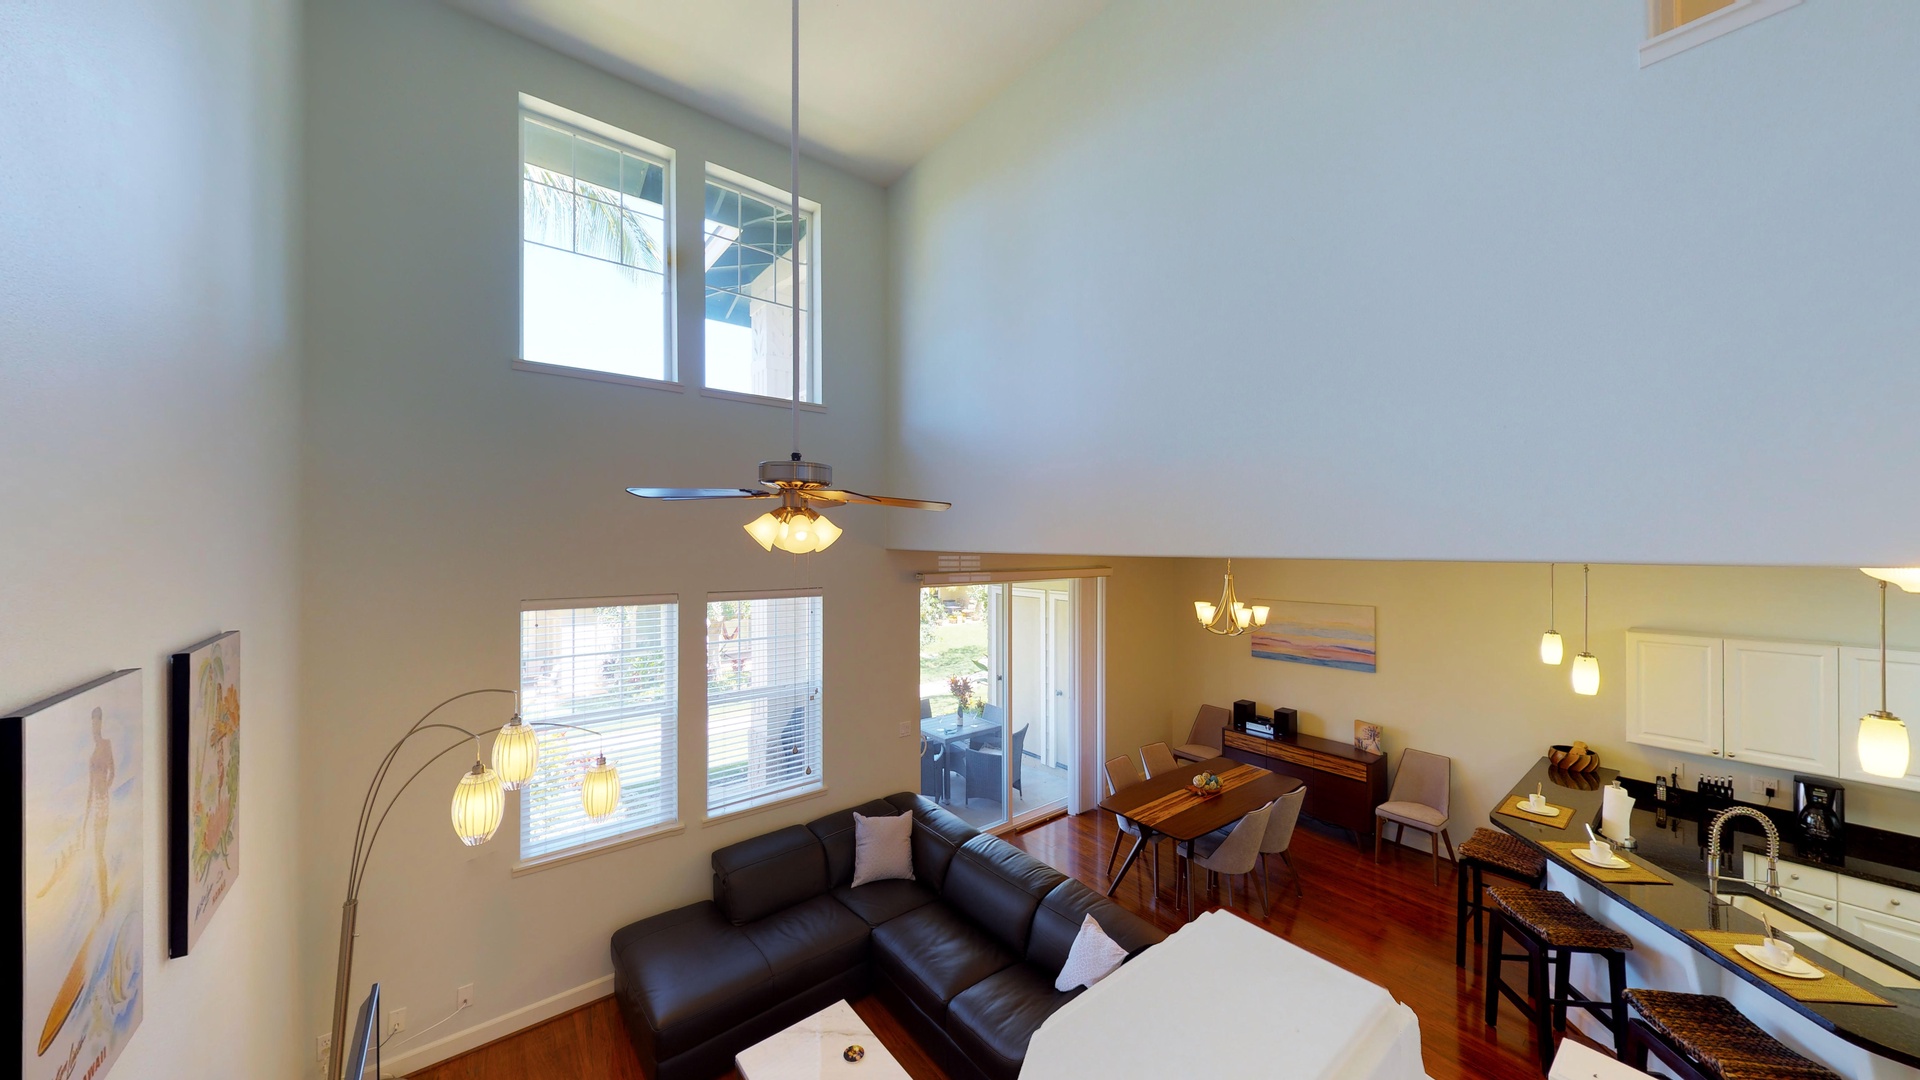 Kapolei Vacation Rentals, Ko Olina Kai 1035D - Natural lighting and scenery from the large windows and vaulted ceilings.